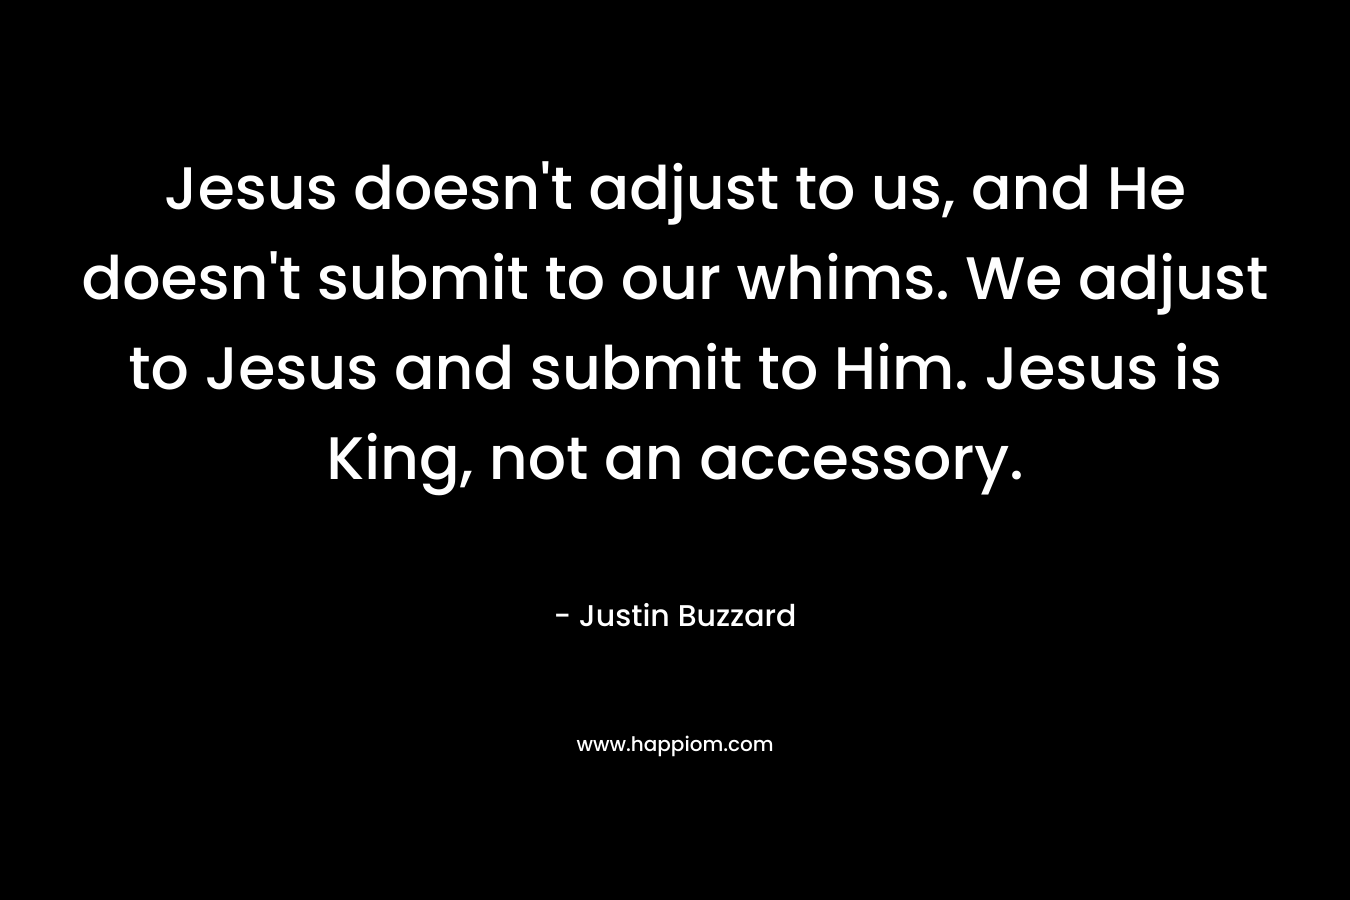 Jesus doesn’t adjust to us, and He doesn’t submit to our whims. We adjust to Jesus and submit to Him. Jesus is King, not an accessory. – Justin Buzzard